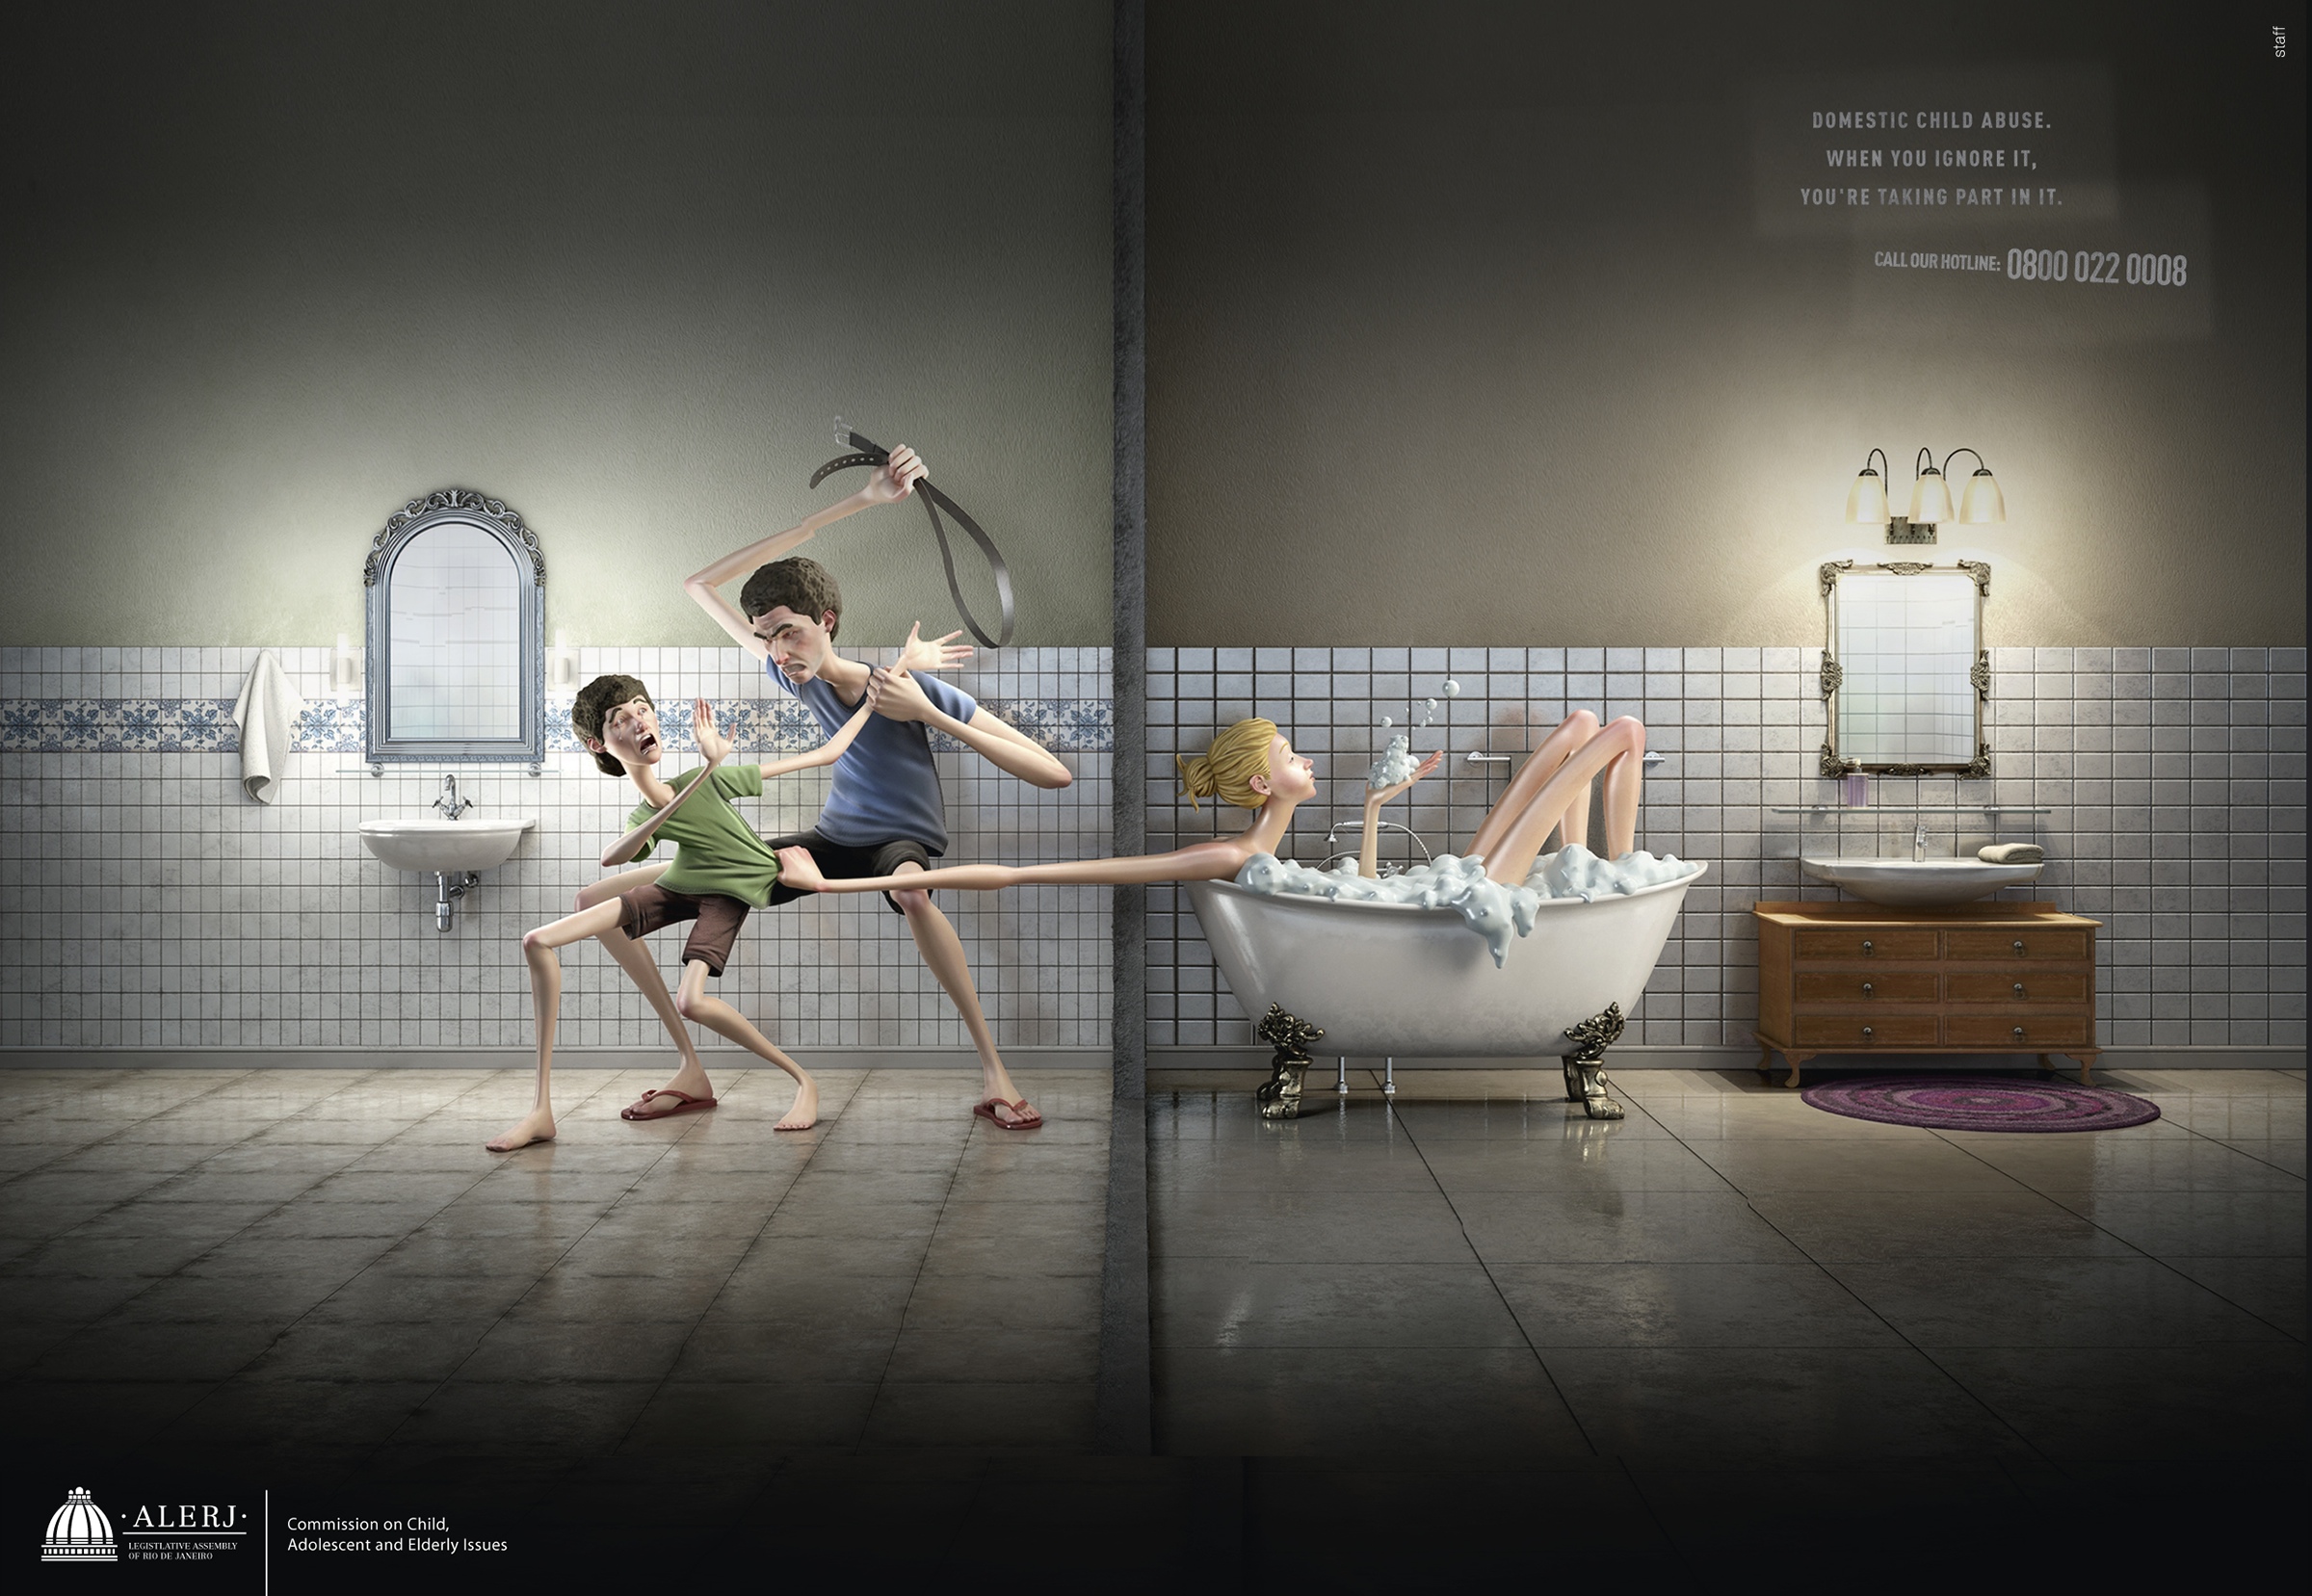 Domestic Child Abuse. When you ignore it, you’re taking part in it. iBall Splendo Campaigns of the World®